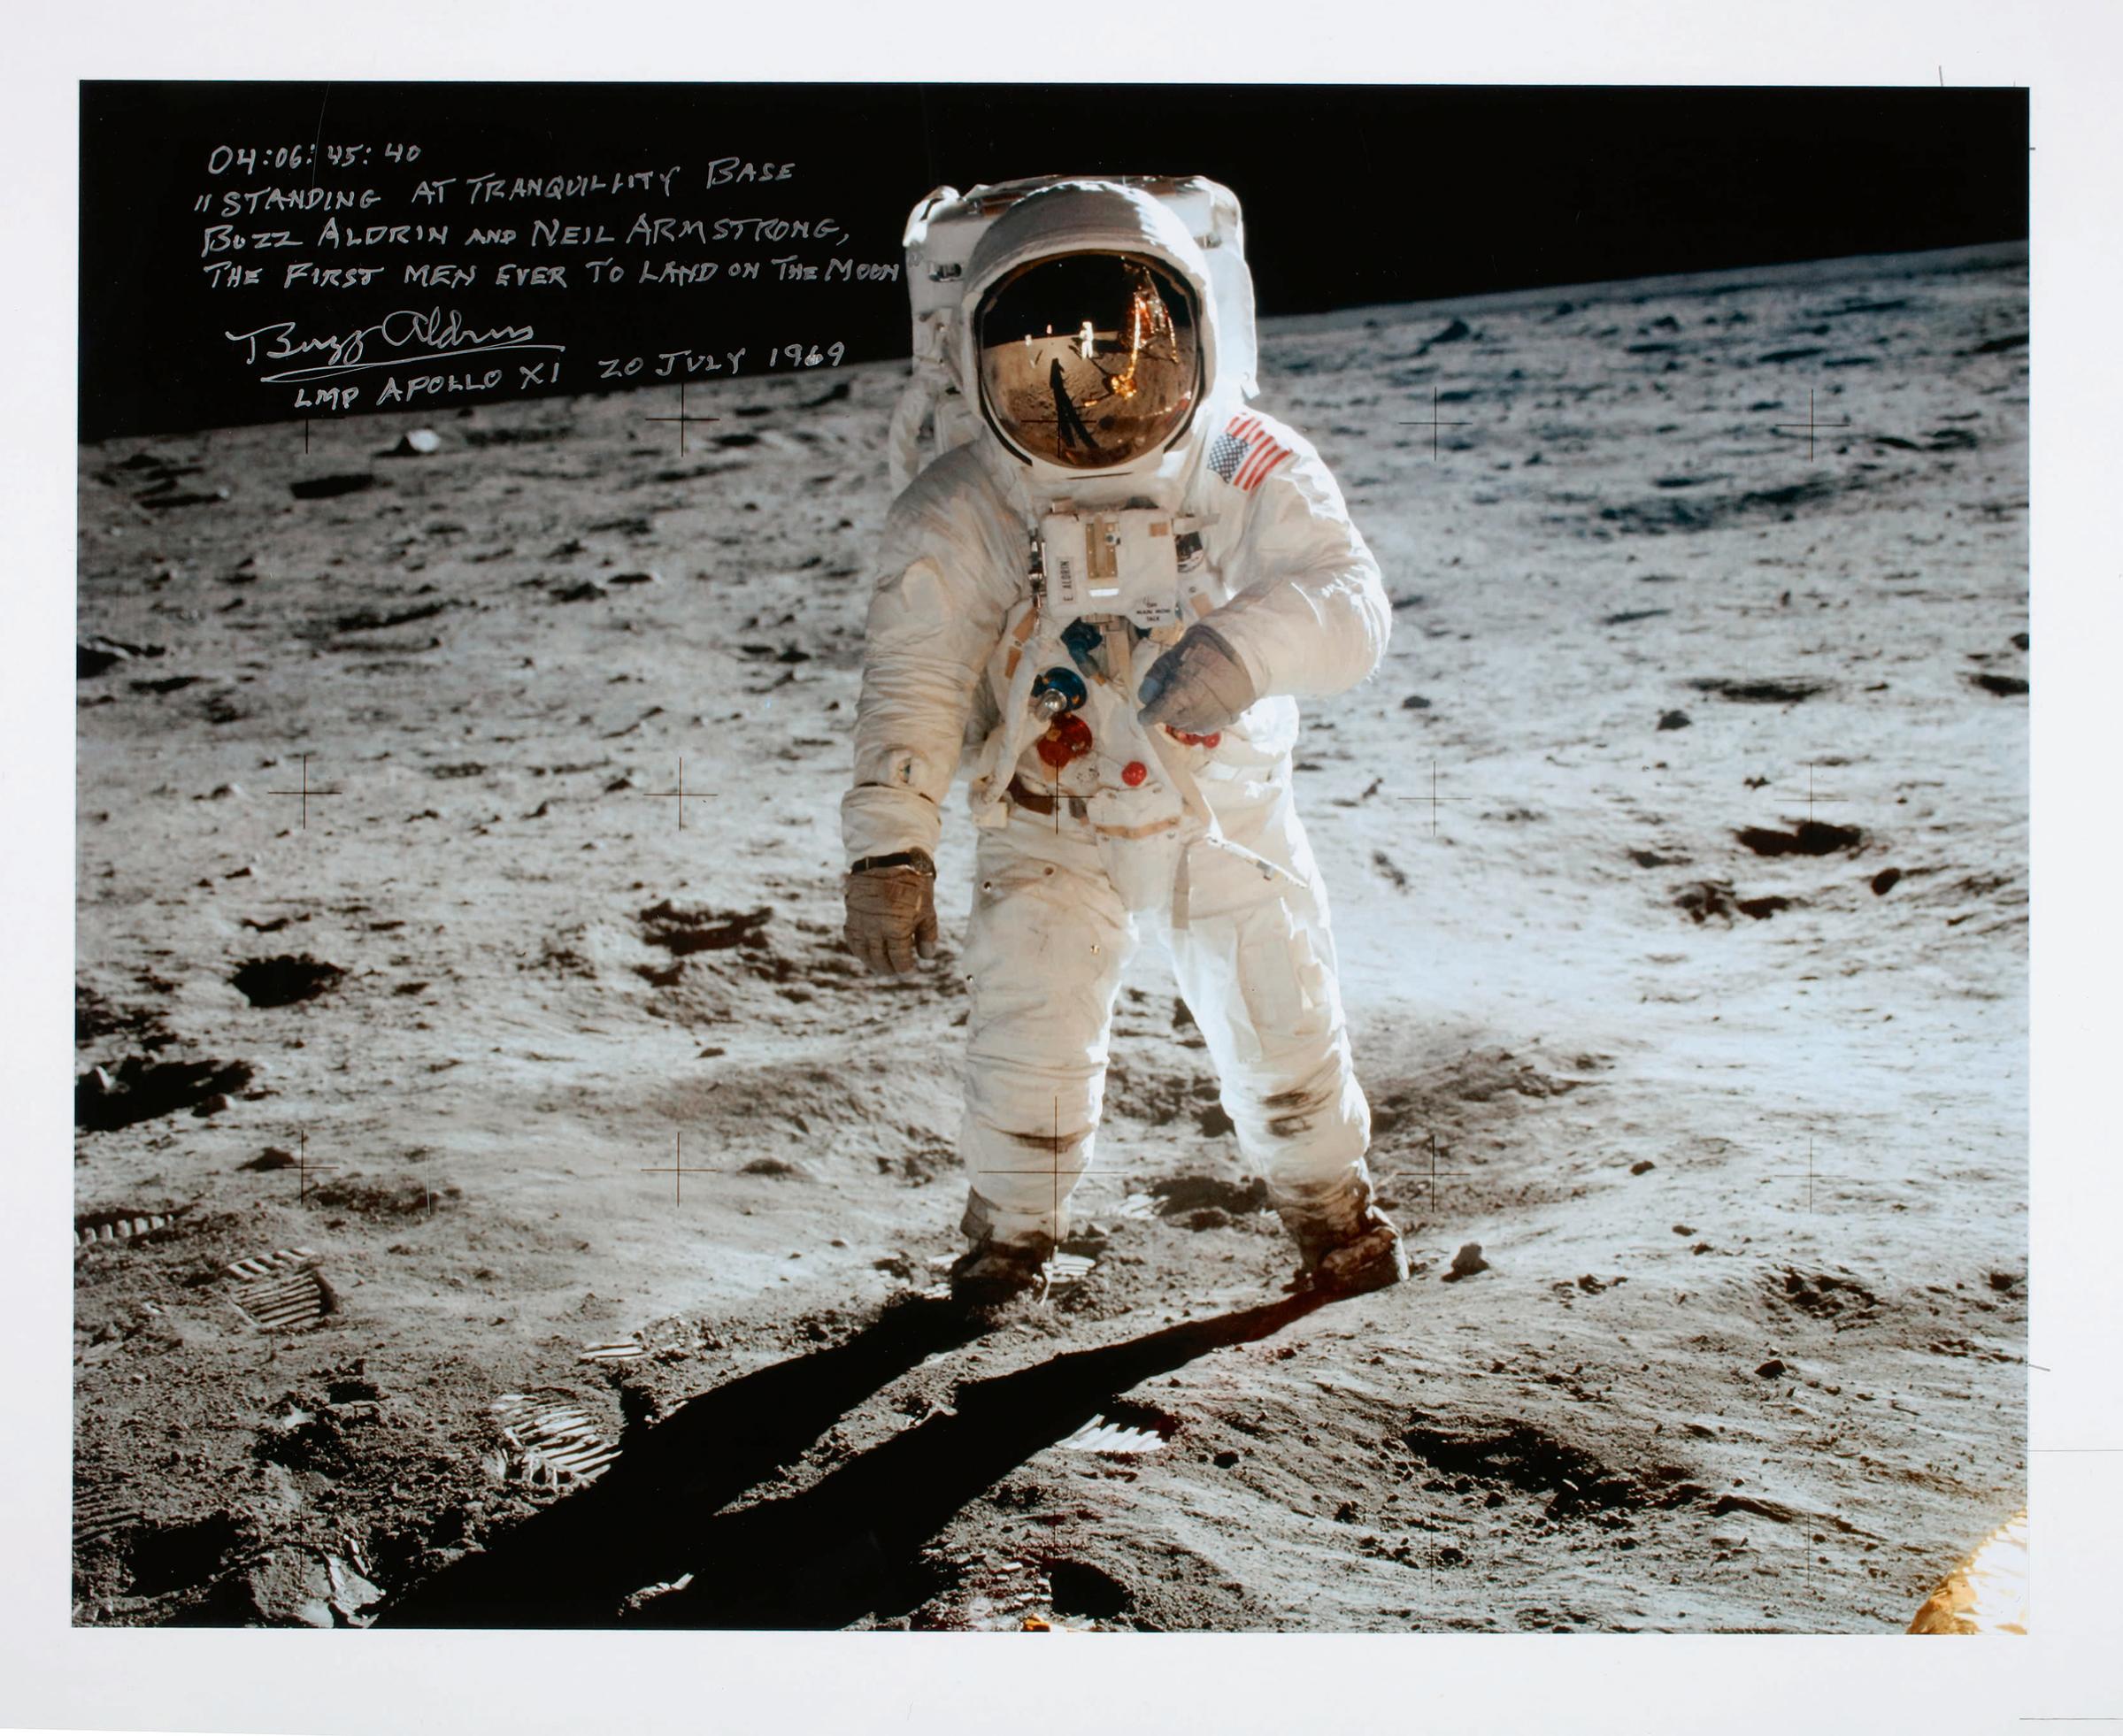 Buzz Aldrin at Tranquility Base. The Apollo program’s most iconic image. Large color photograph taken by Neil Armstrong of Buzz Aldrin during their Apollo 11 moonwalk. Signed & inscribed by Buzz Aldrin.